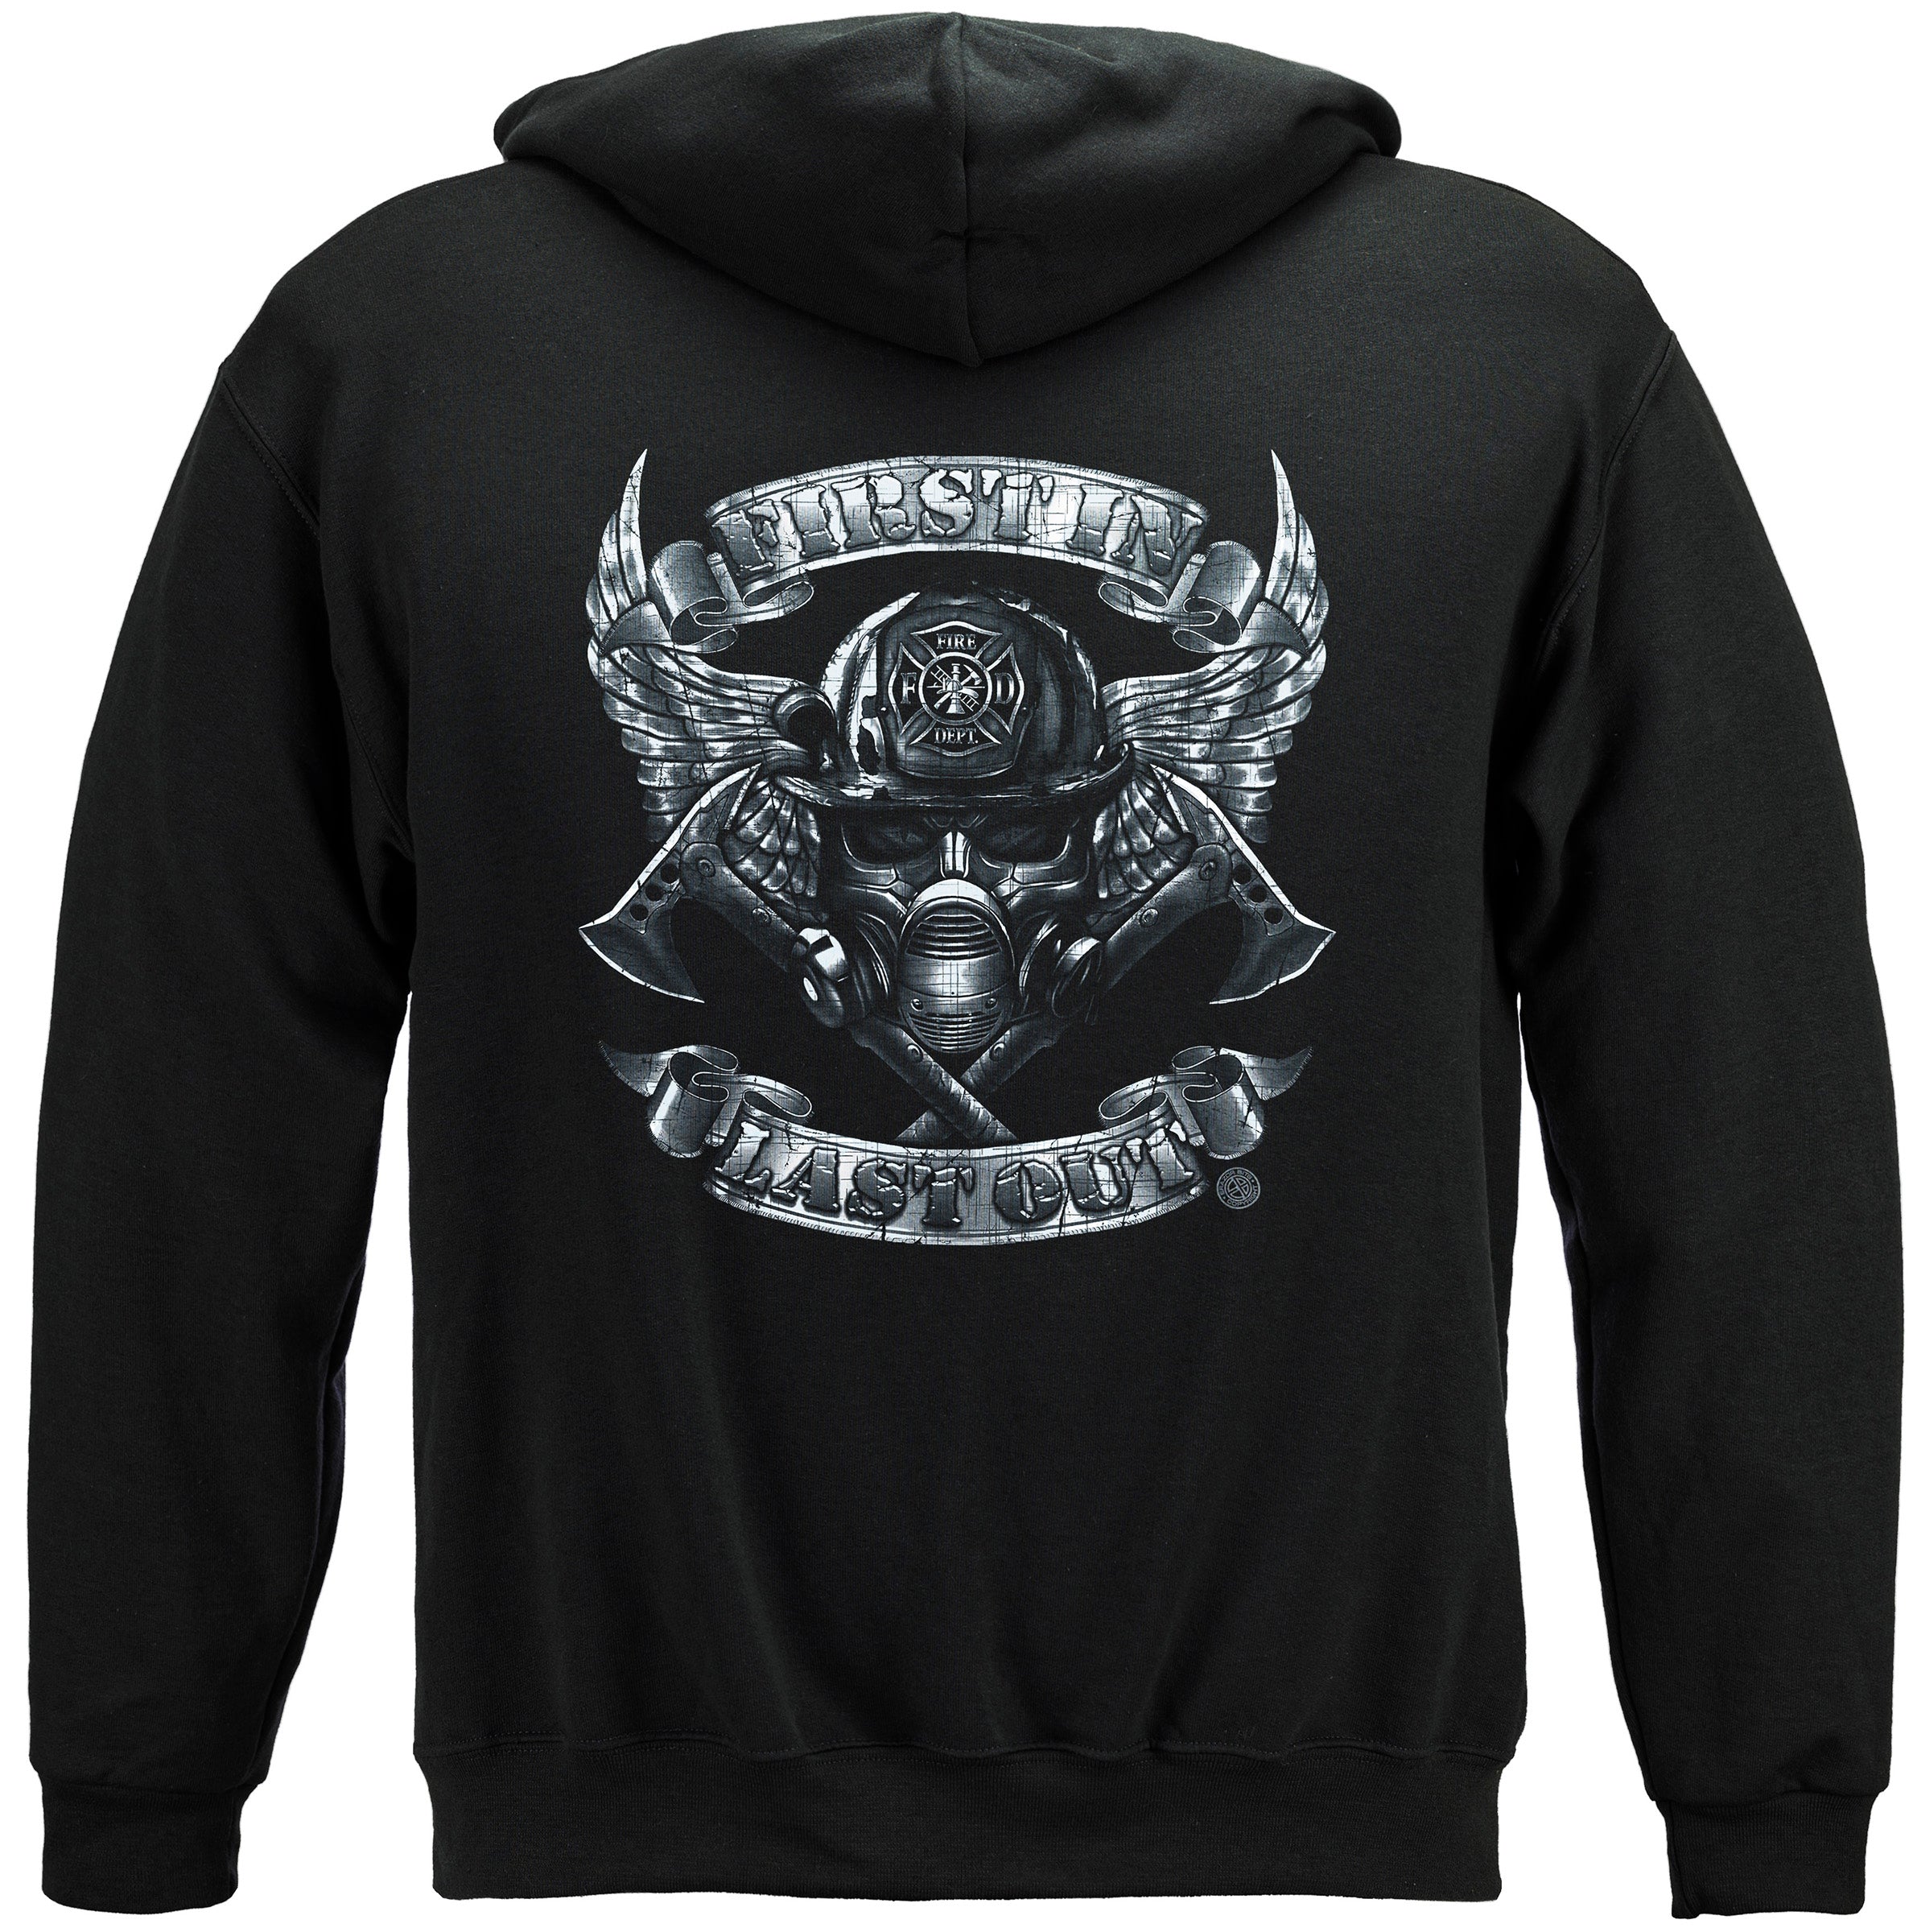 First In Last Out Hooded Sweatshirt